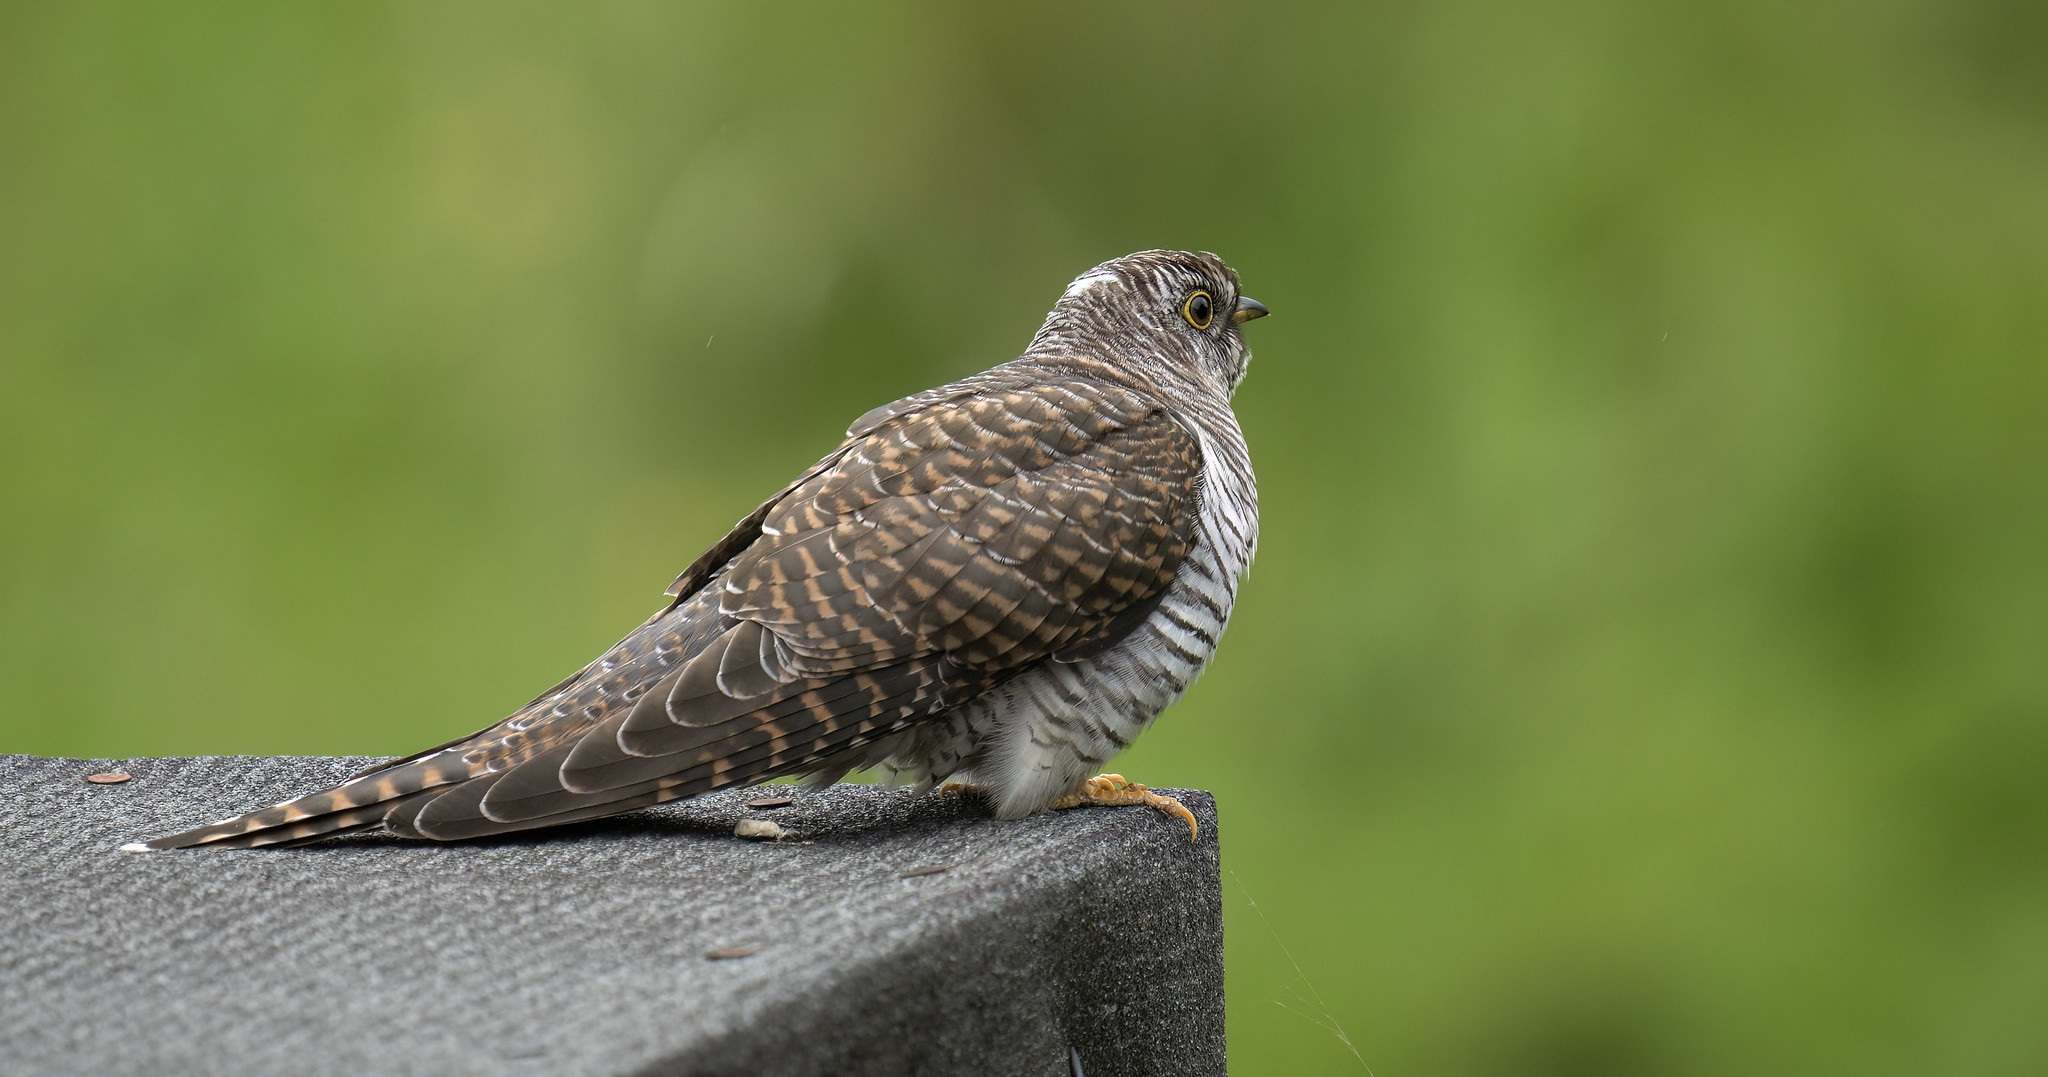 Juvenile Cuckoo - showing the tell-tale white spot on the nape.